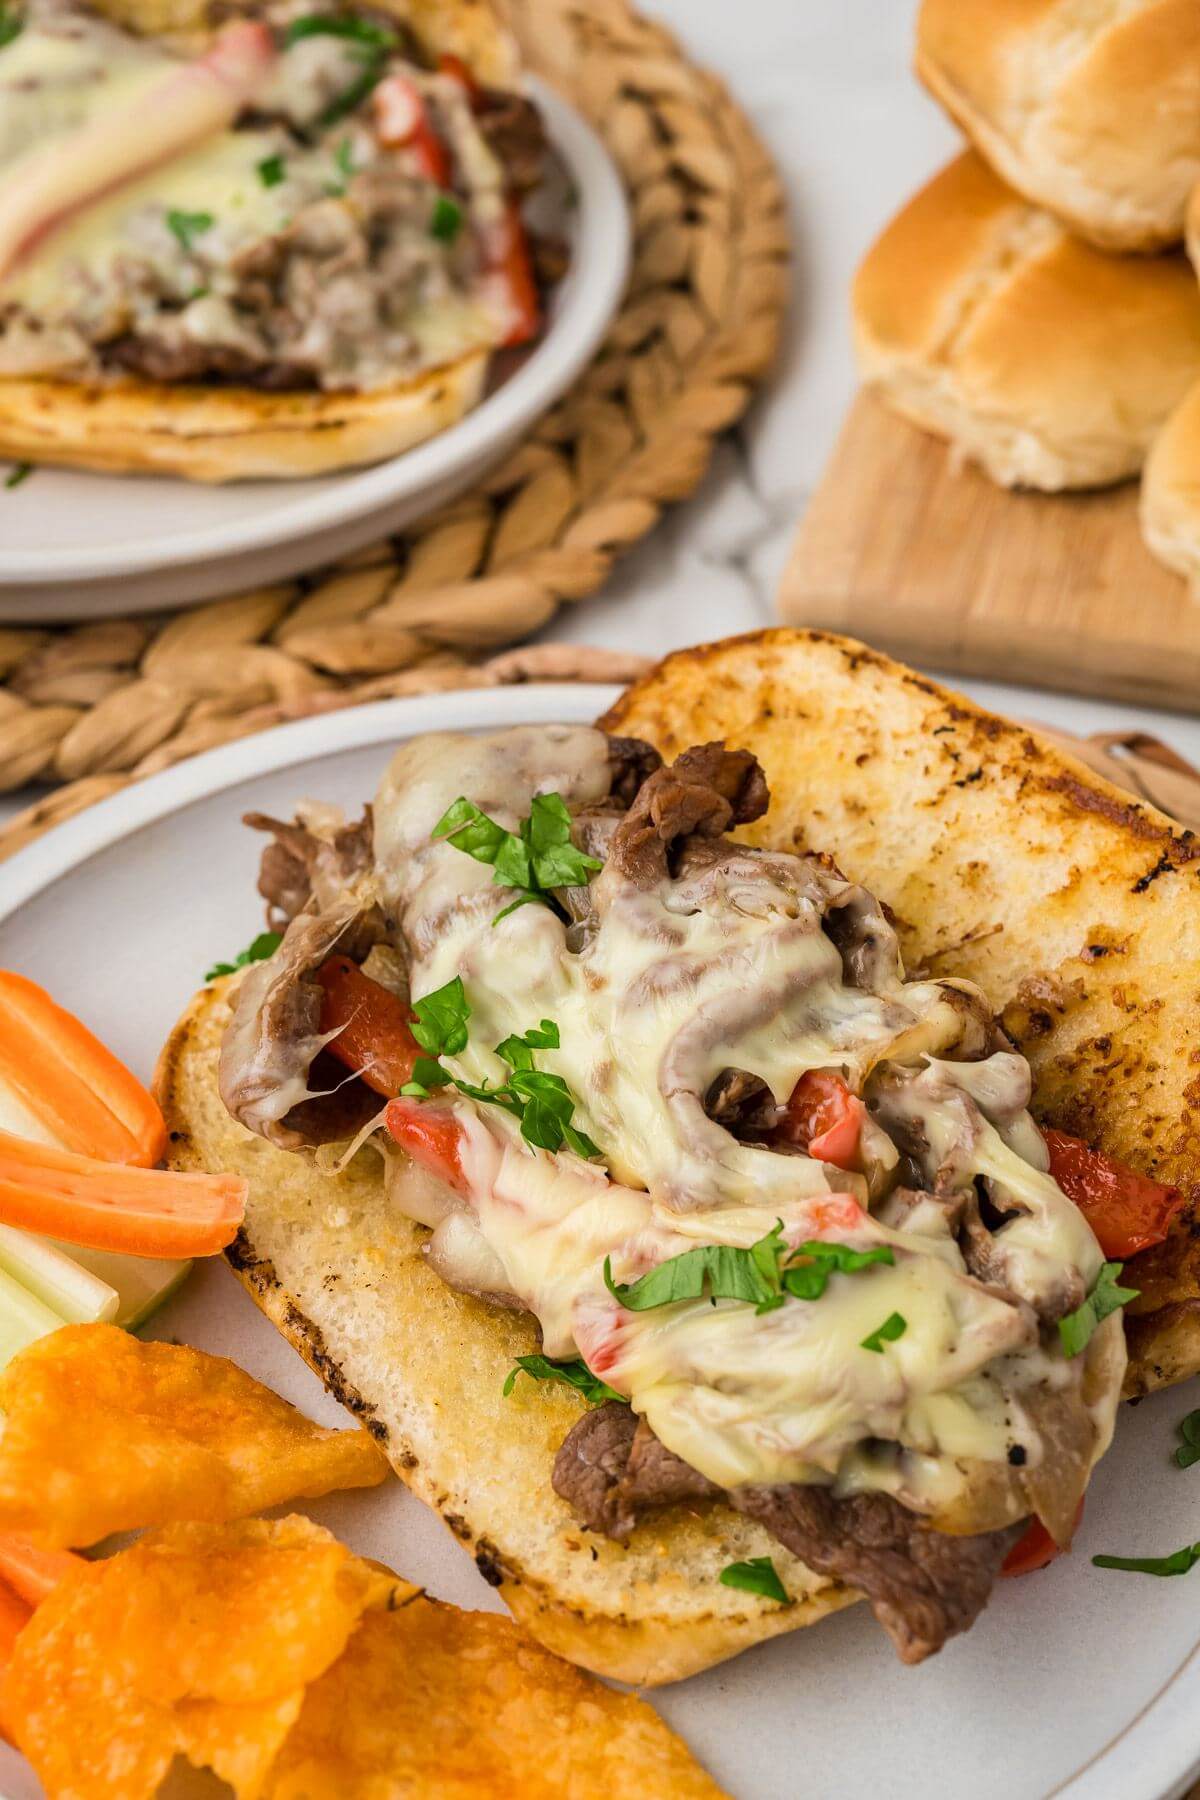 Potato chips, carrots, and more Hoagie rolls sit next to open filled cheesesteak sandwiches on plates.